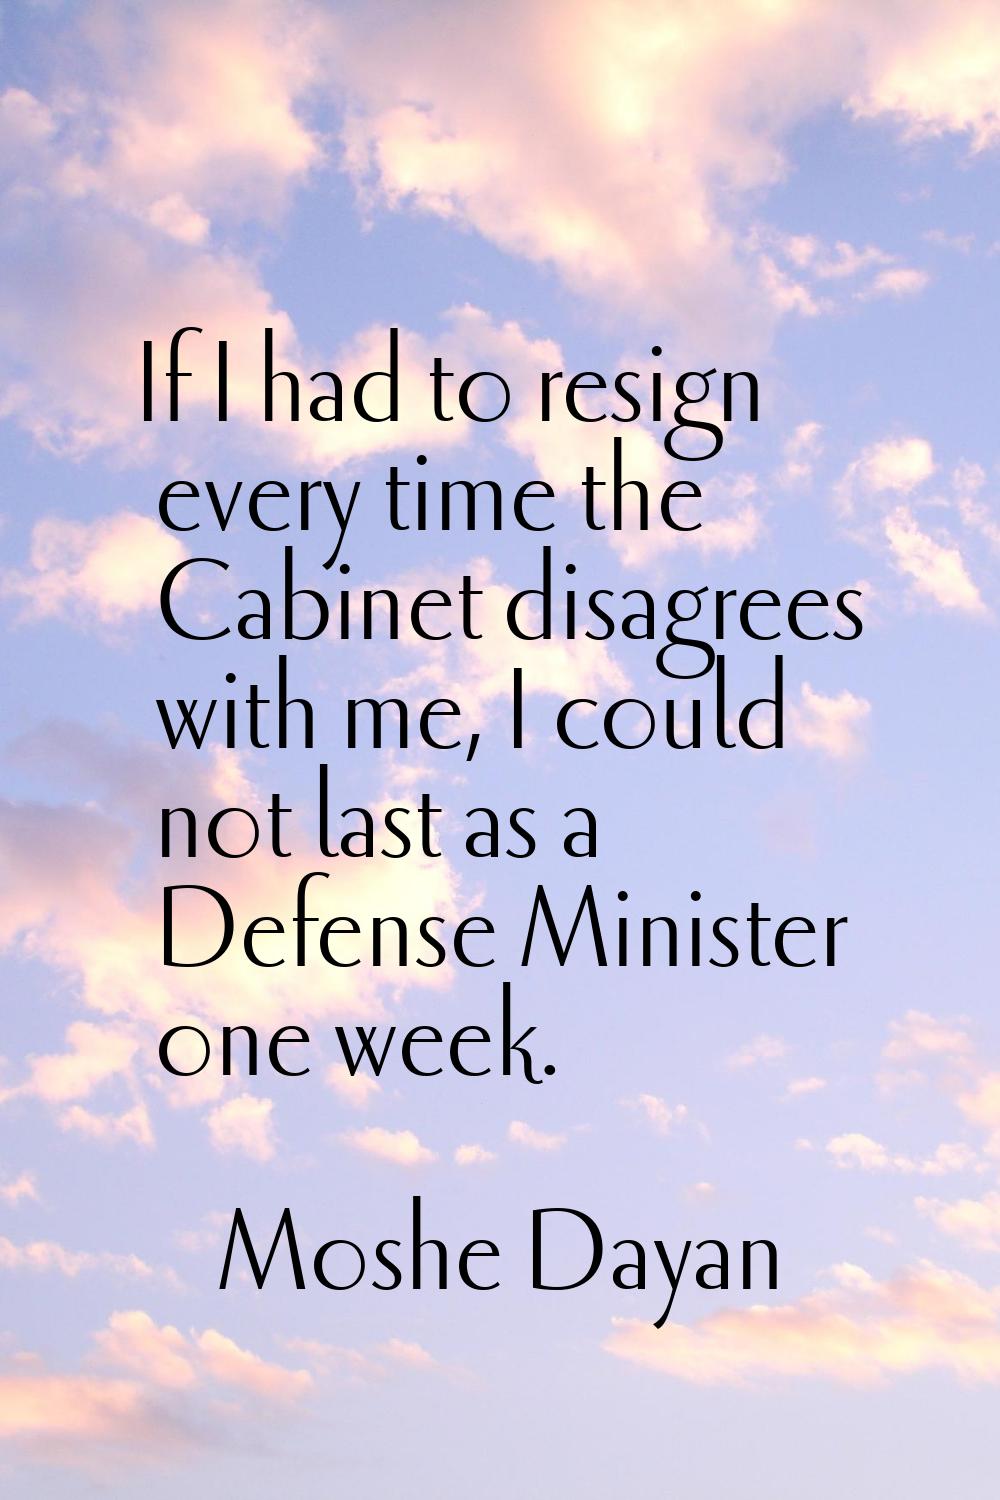 If I had to resign every time the Cabinet disagrees with me, I could not last as a Defense Minister